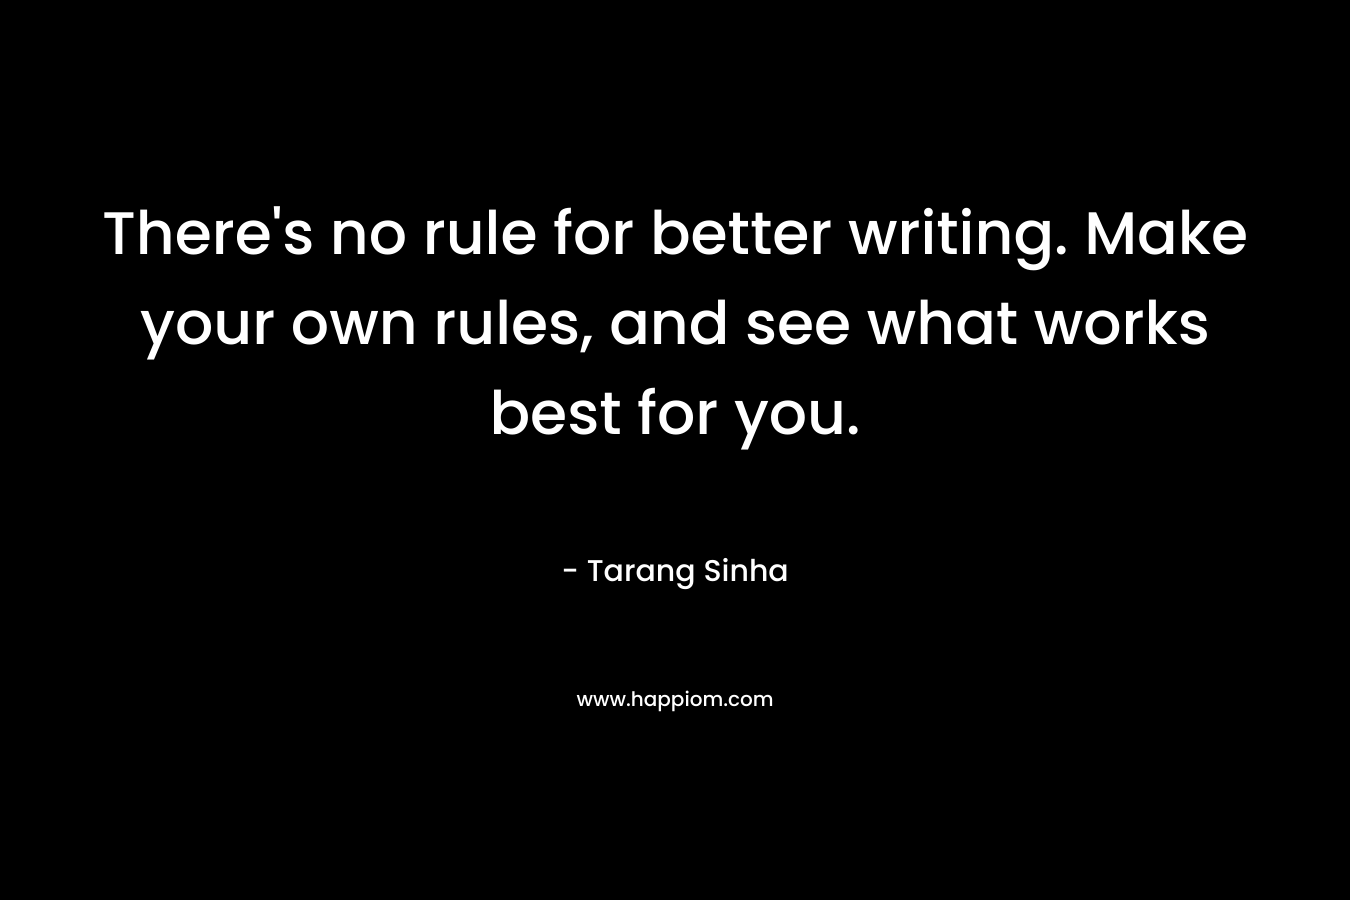 There’s no rule for better writing. Make your own rules, and see what works best for you. – Tarang Sinha